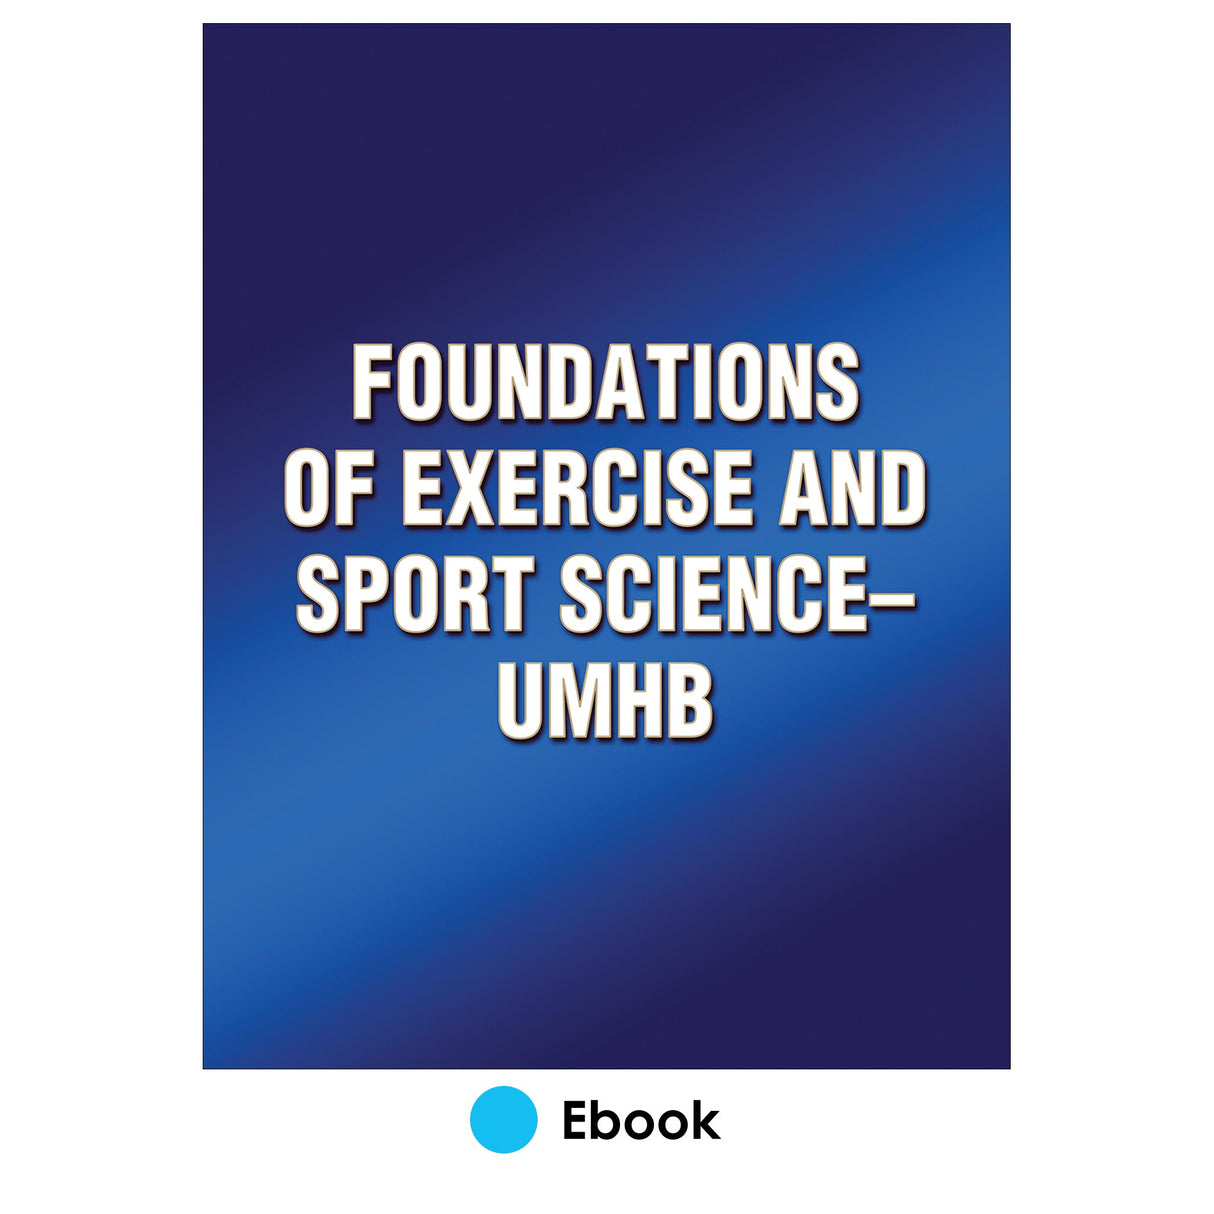 Foundations of Exercise and Sport Science-UMHB